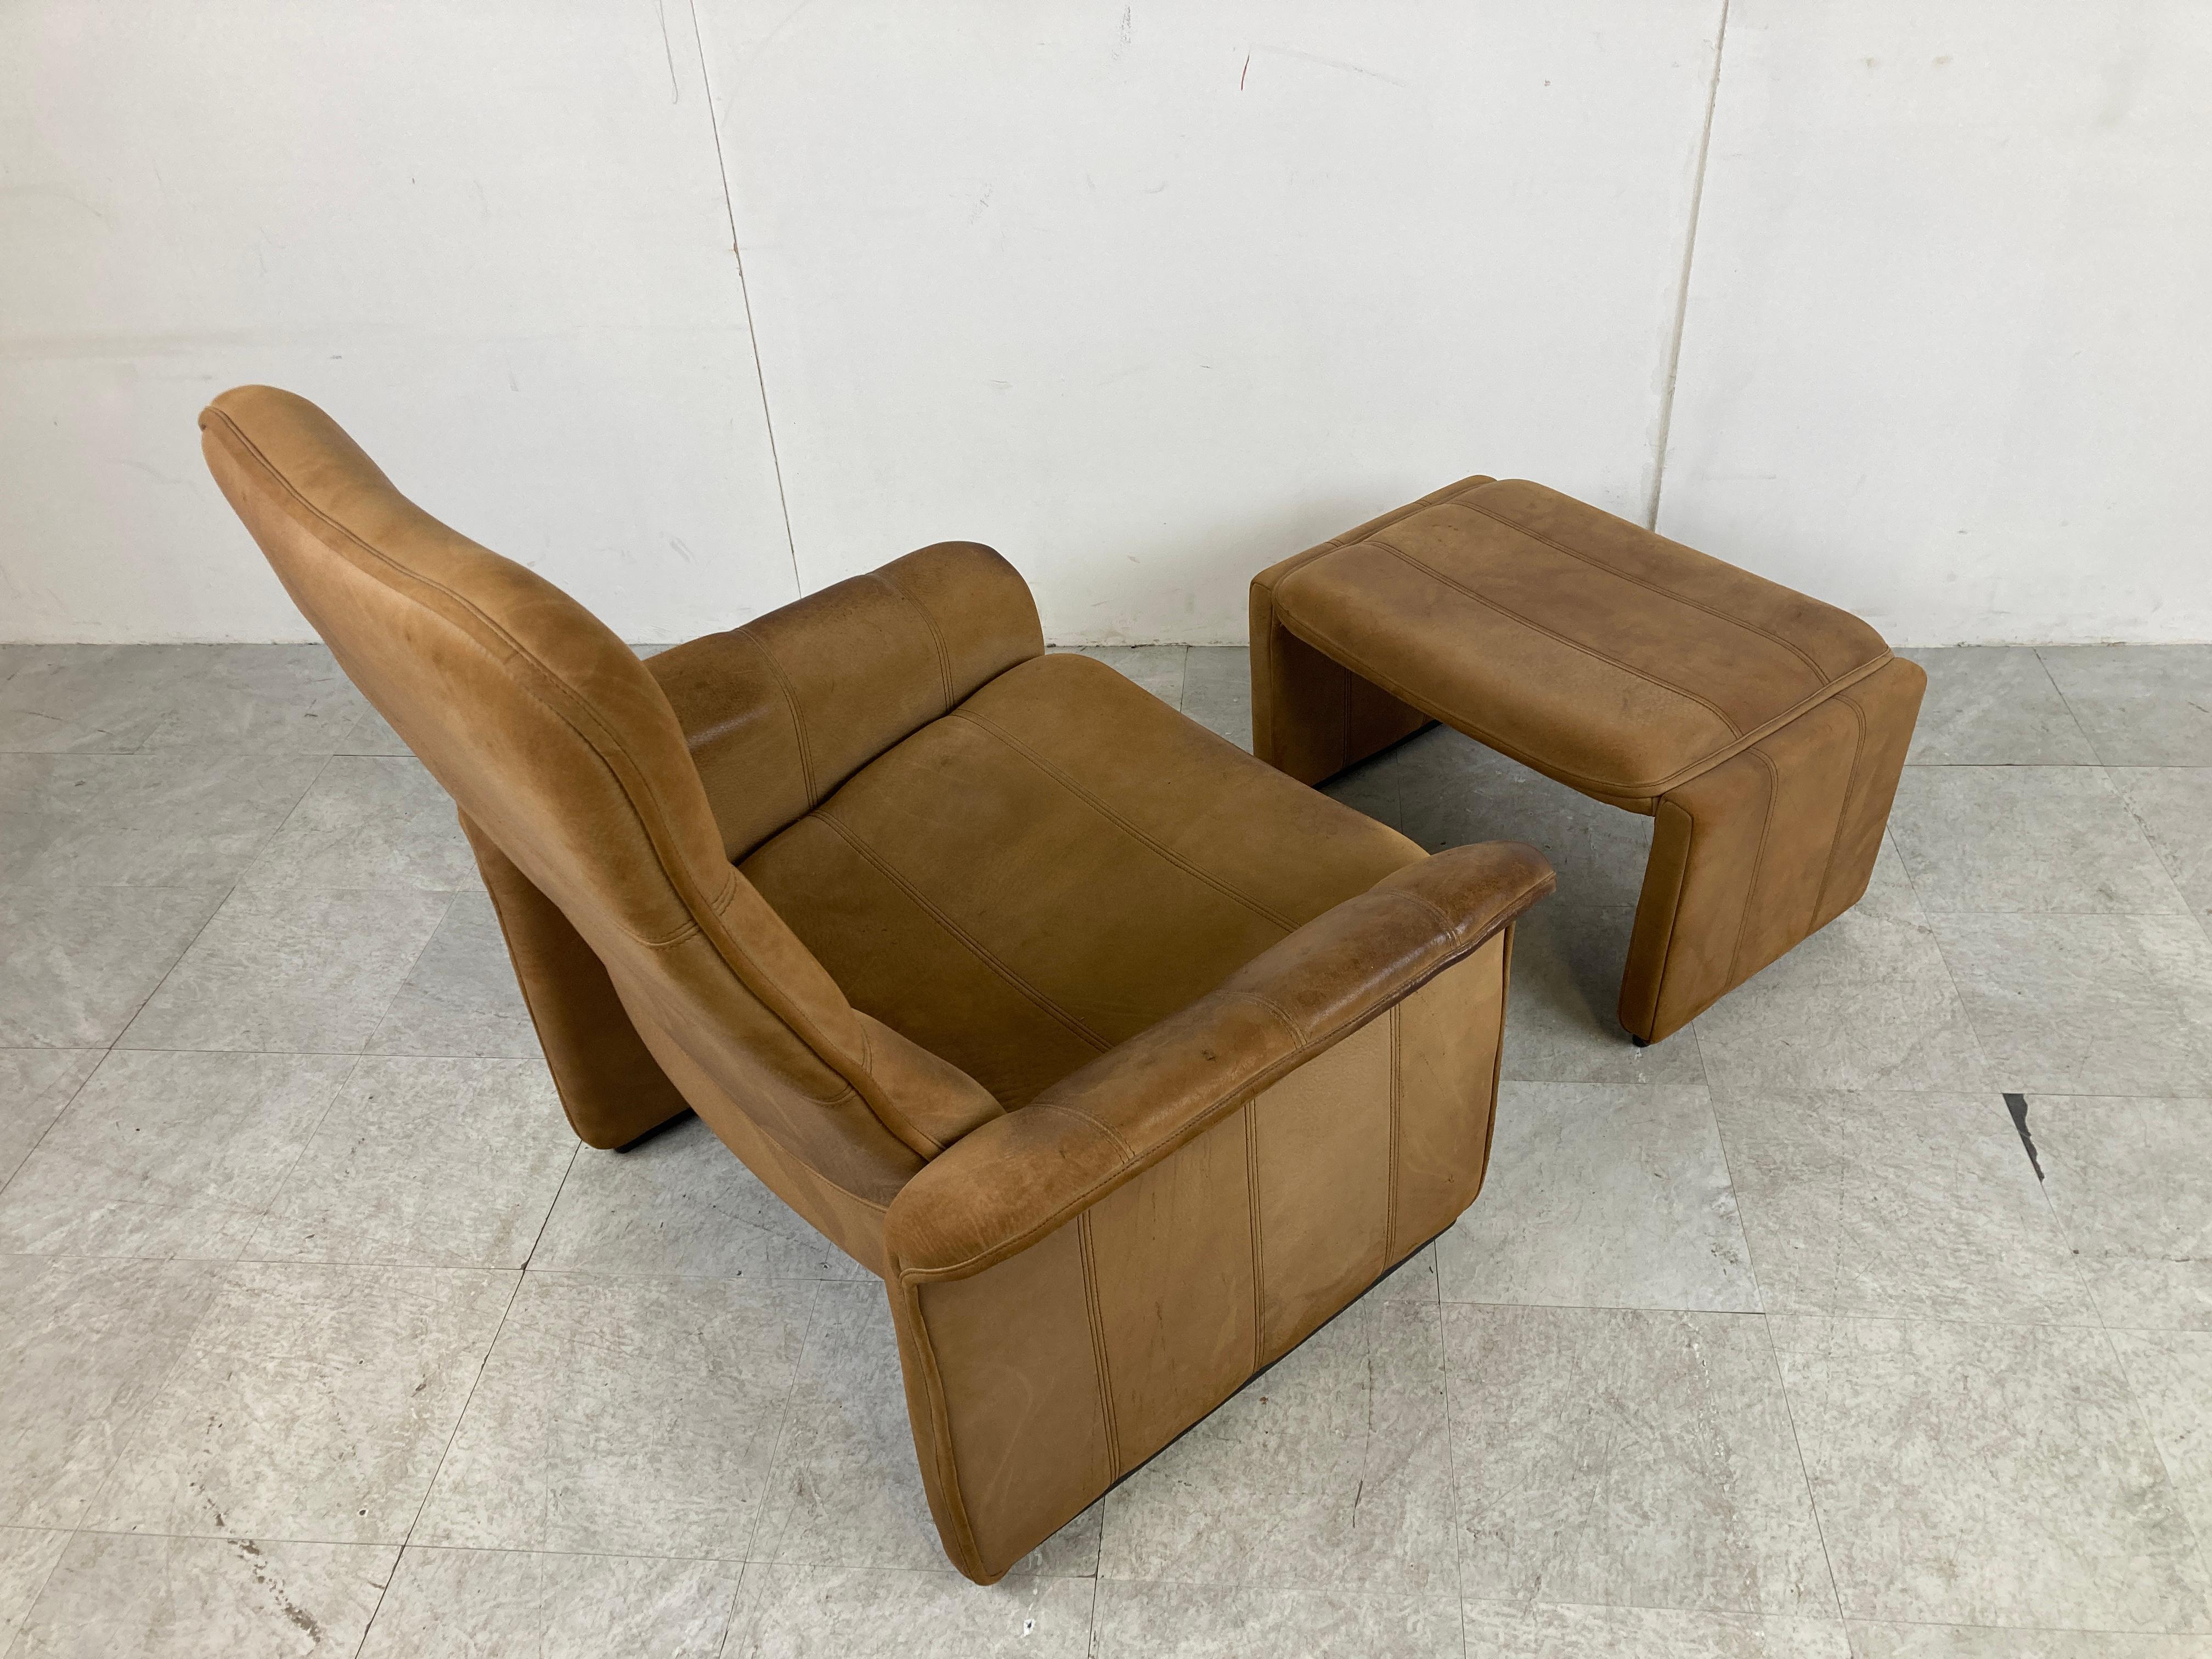 Vintage Ds 50 Leather Lounge Chair and Ottoman by De Sede, 1970s For Sale 4